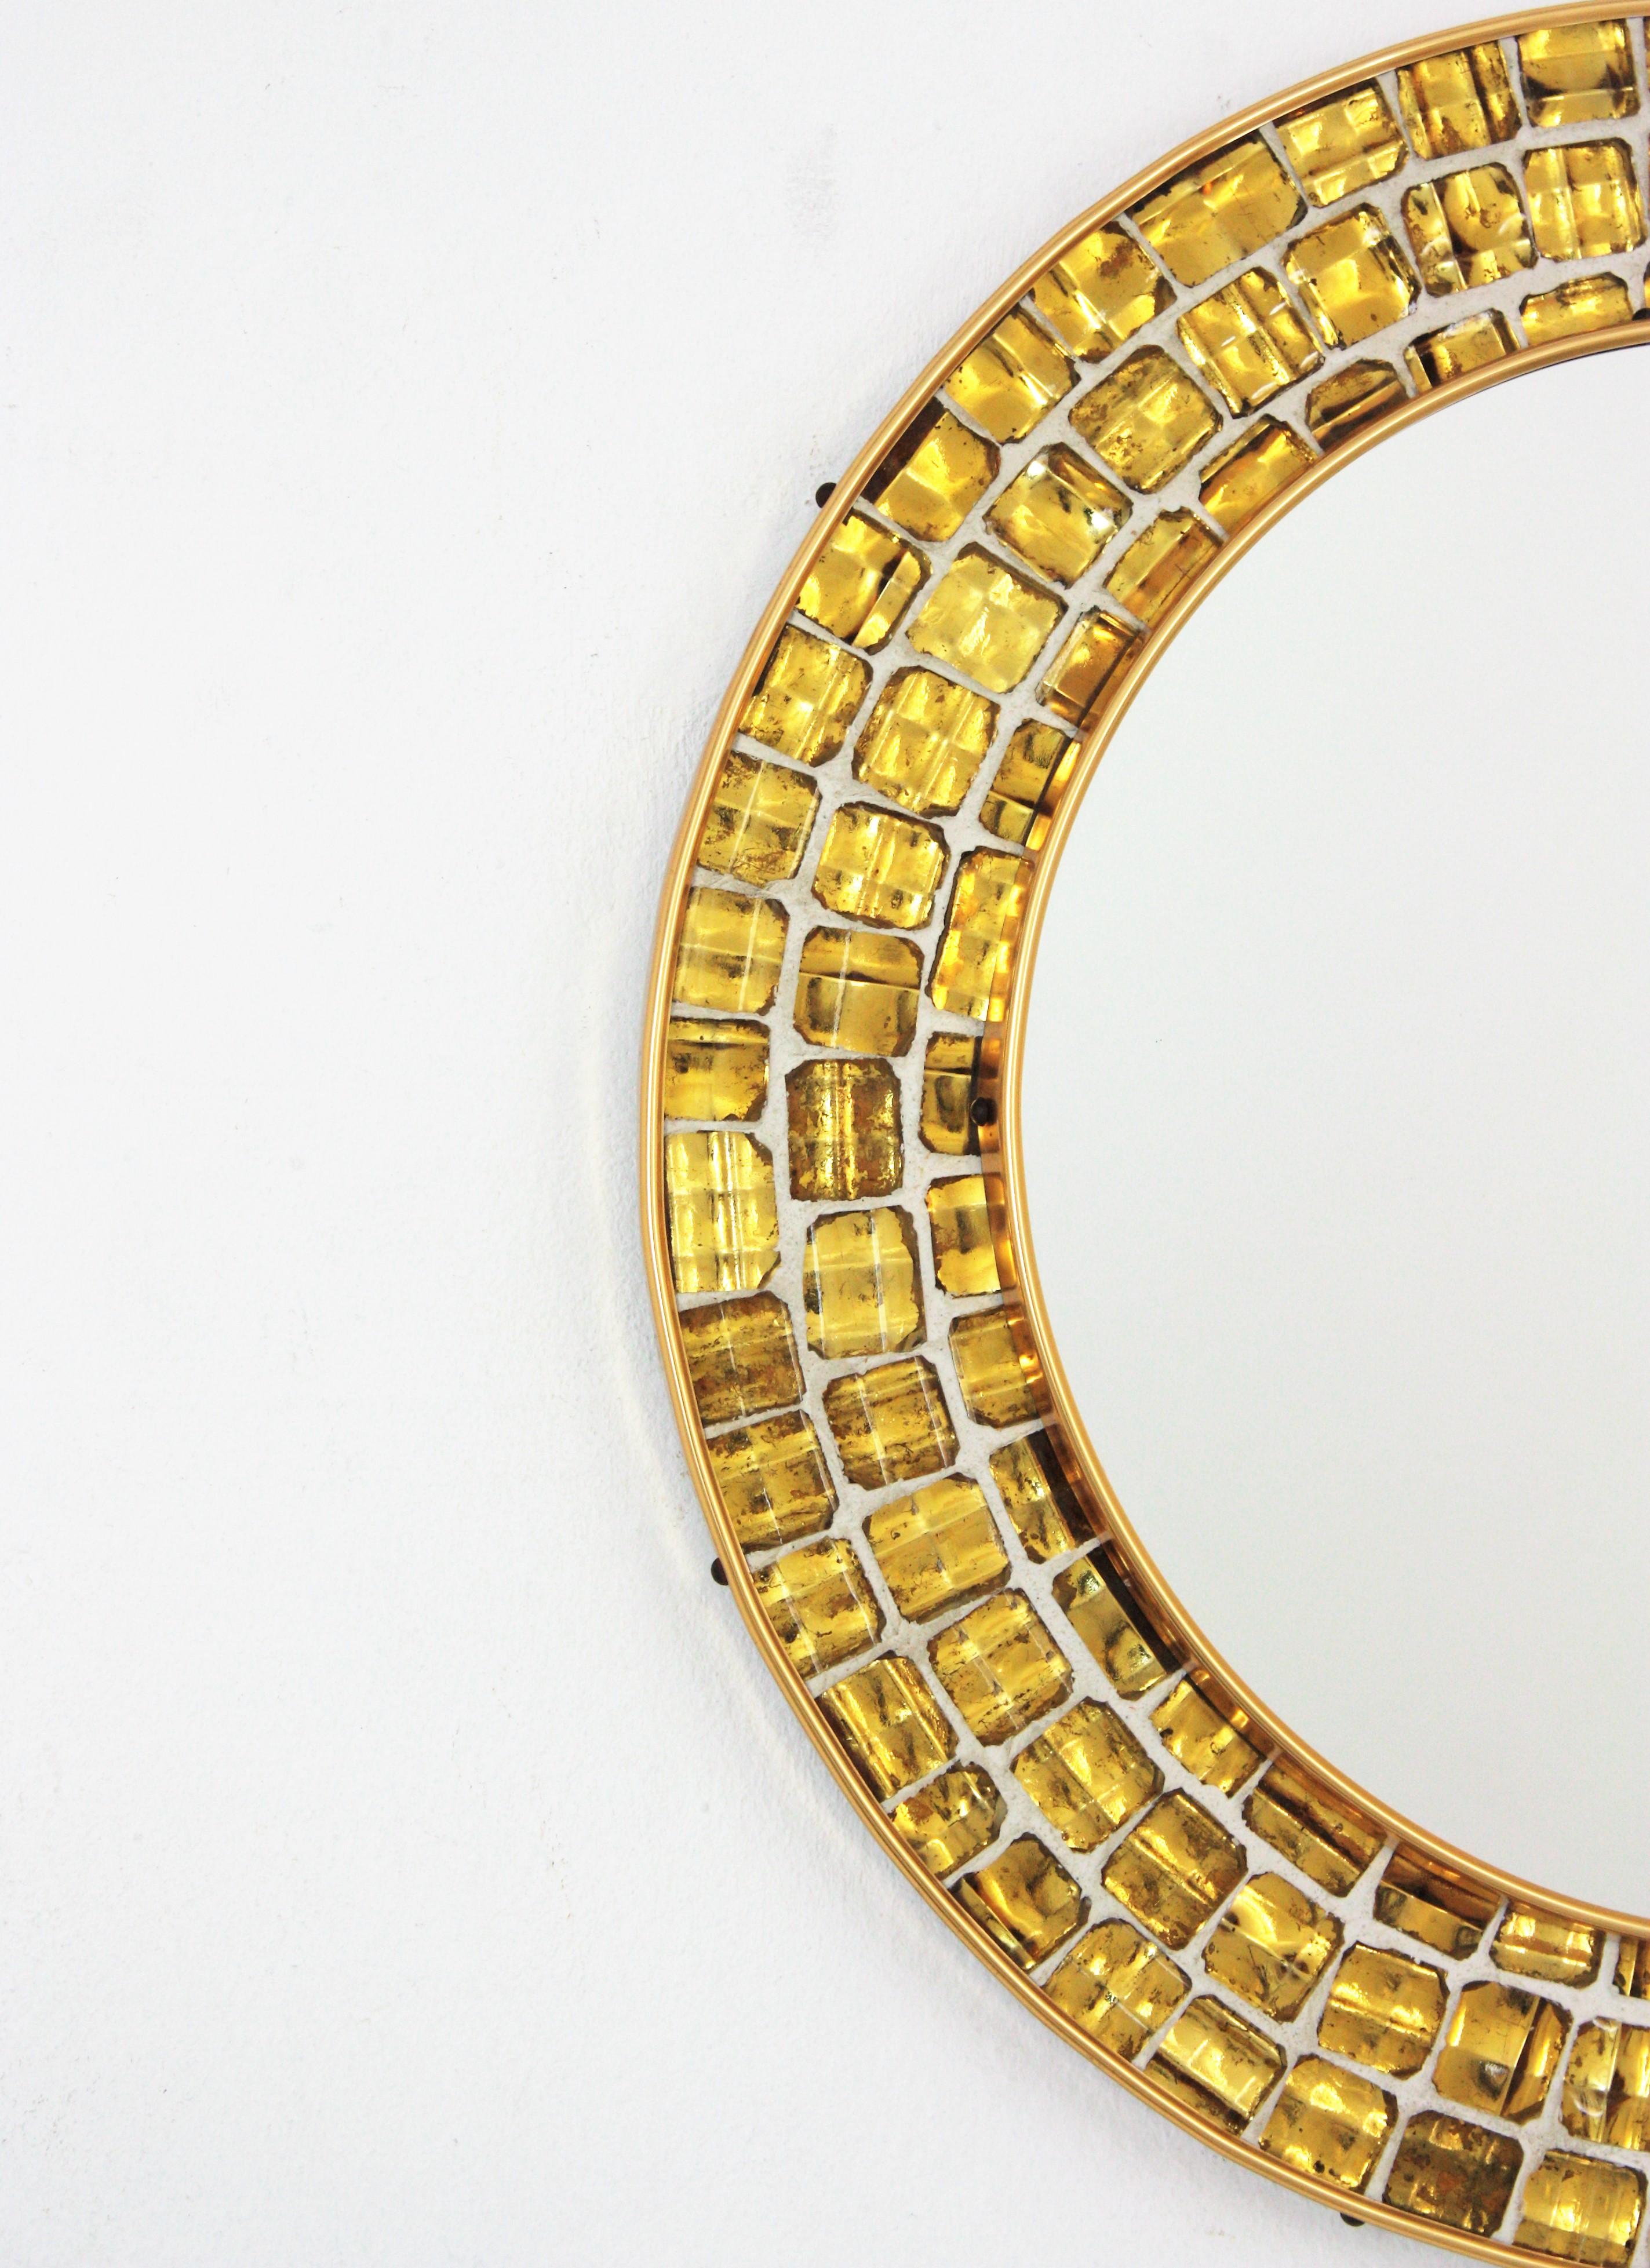 Spanish Midcentury Round Mirror with Golden Glass Mosaic Frame For Sale